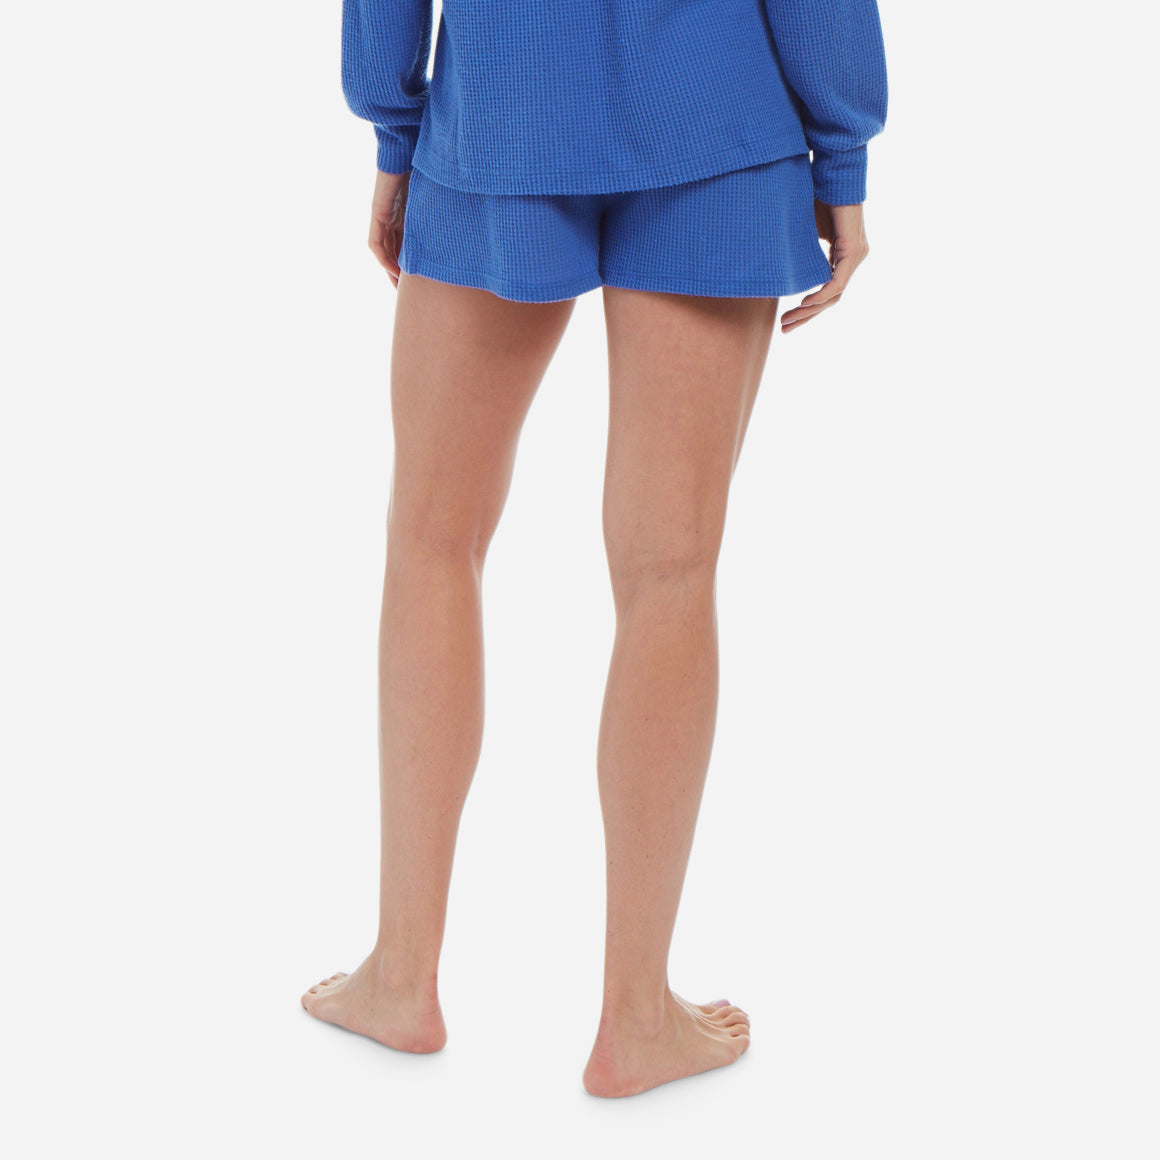 Back-facing female model wearing waffle-knit shorts in royal blue color.